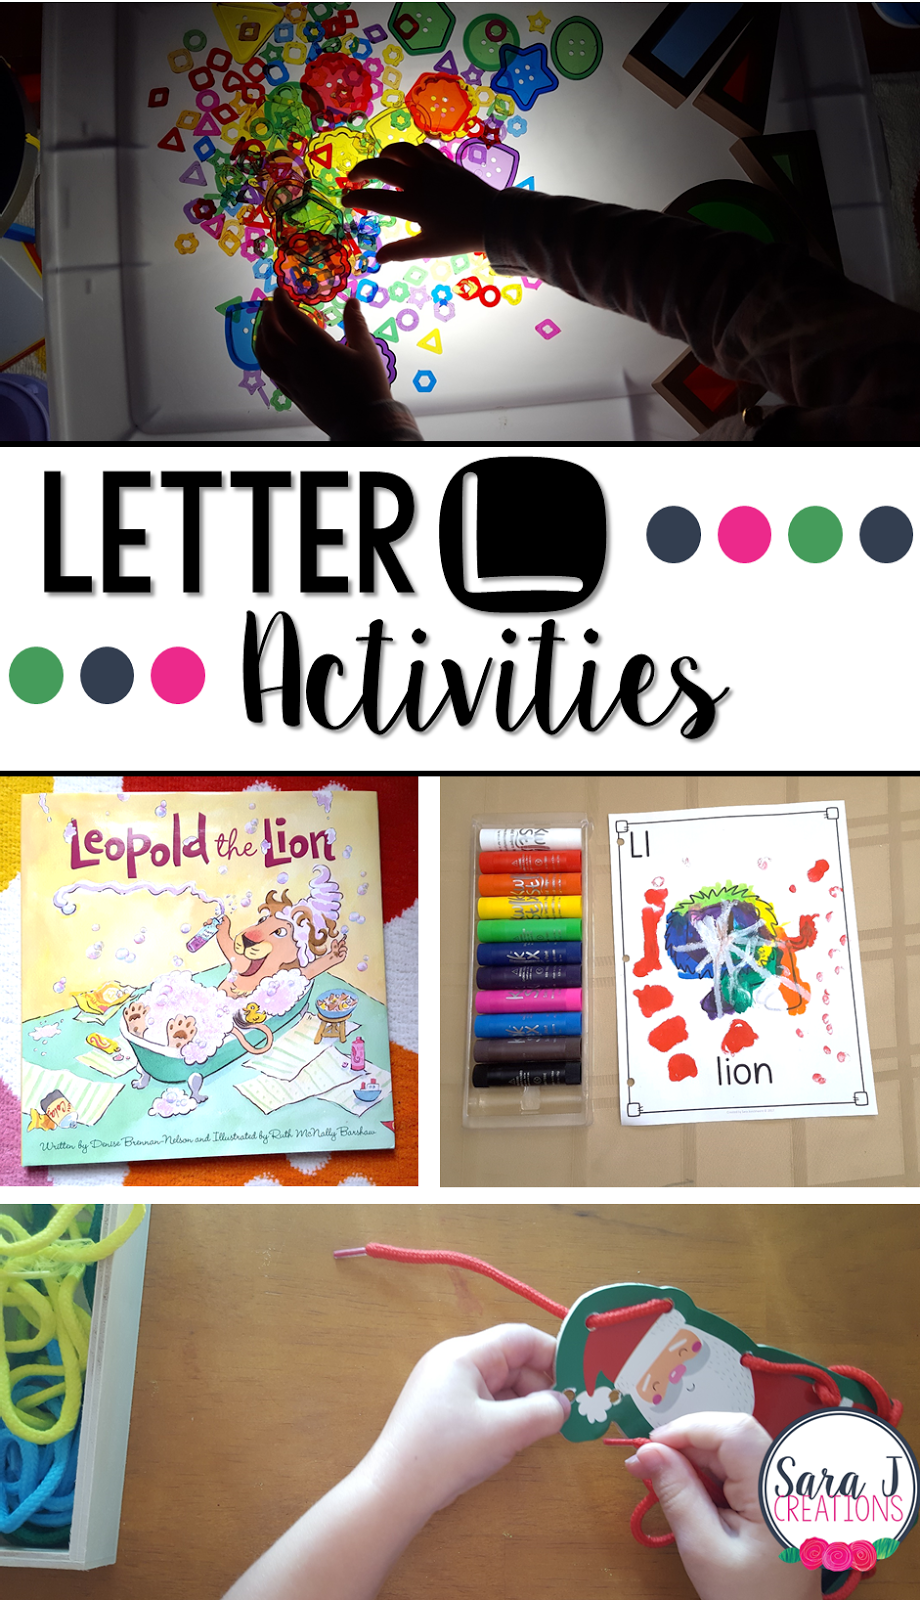 Letter L Activities that would be perfect for preschool or kindergarten. Art, fine motor, literacy and alphabet practice all rolled into Letter L fun.